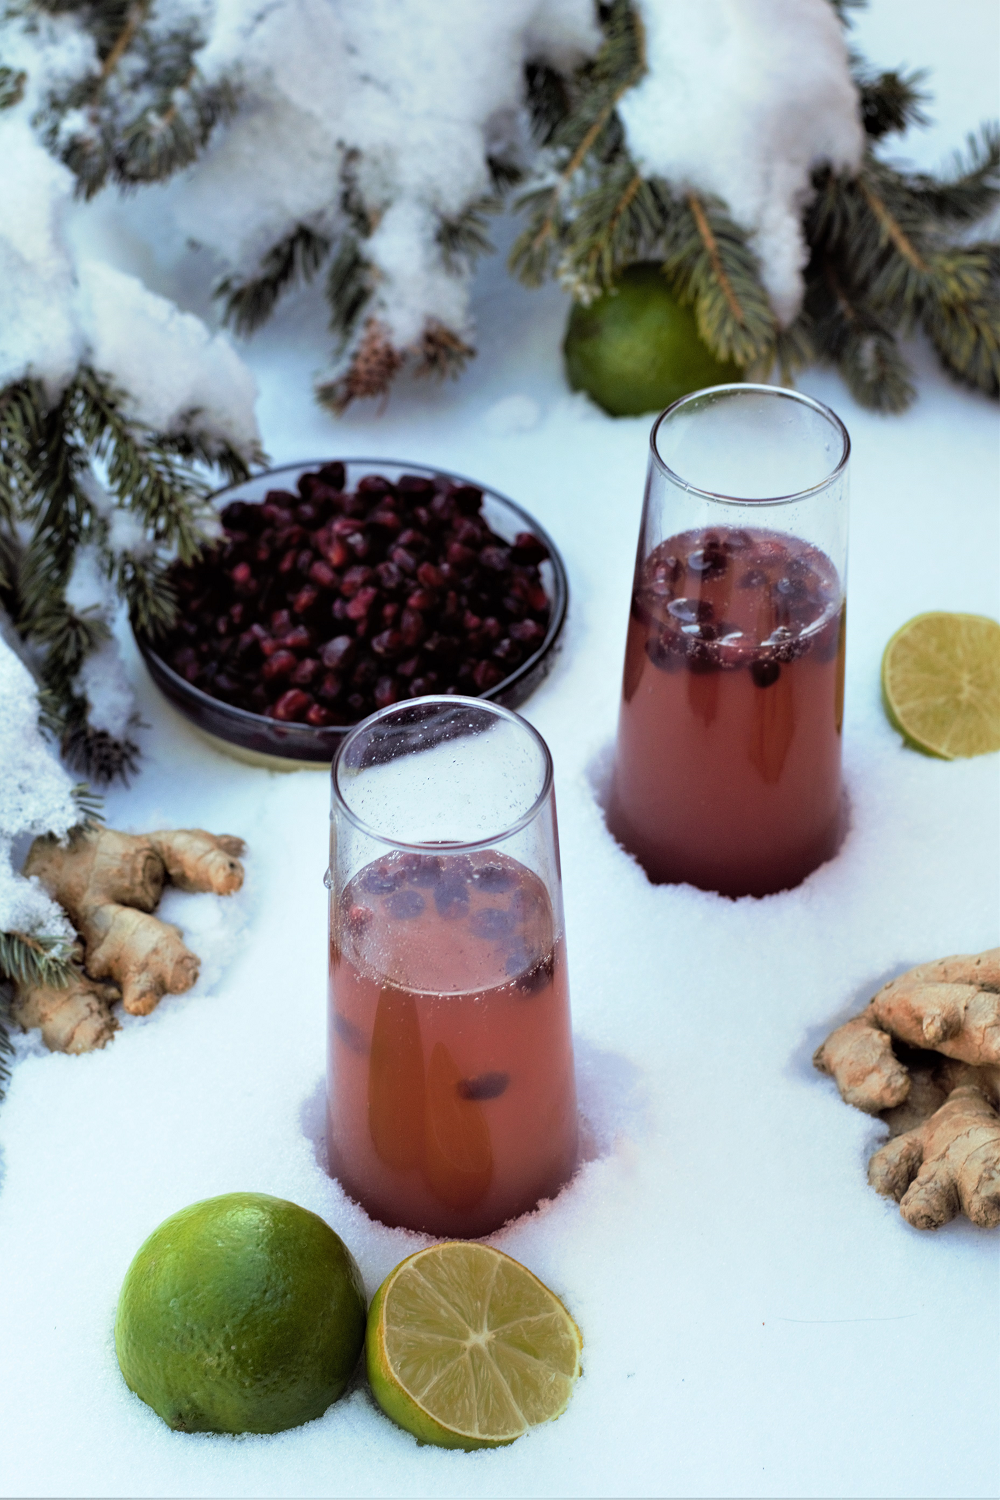 Putting an upscale twist on the classic mule by muddling fresh ginger with bright, fruity pomegranate juice and topping it off with champagne!